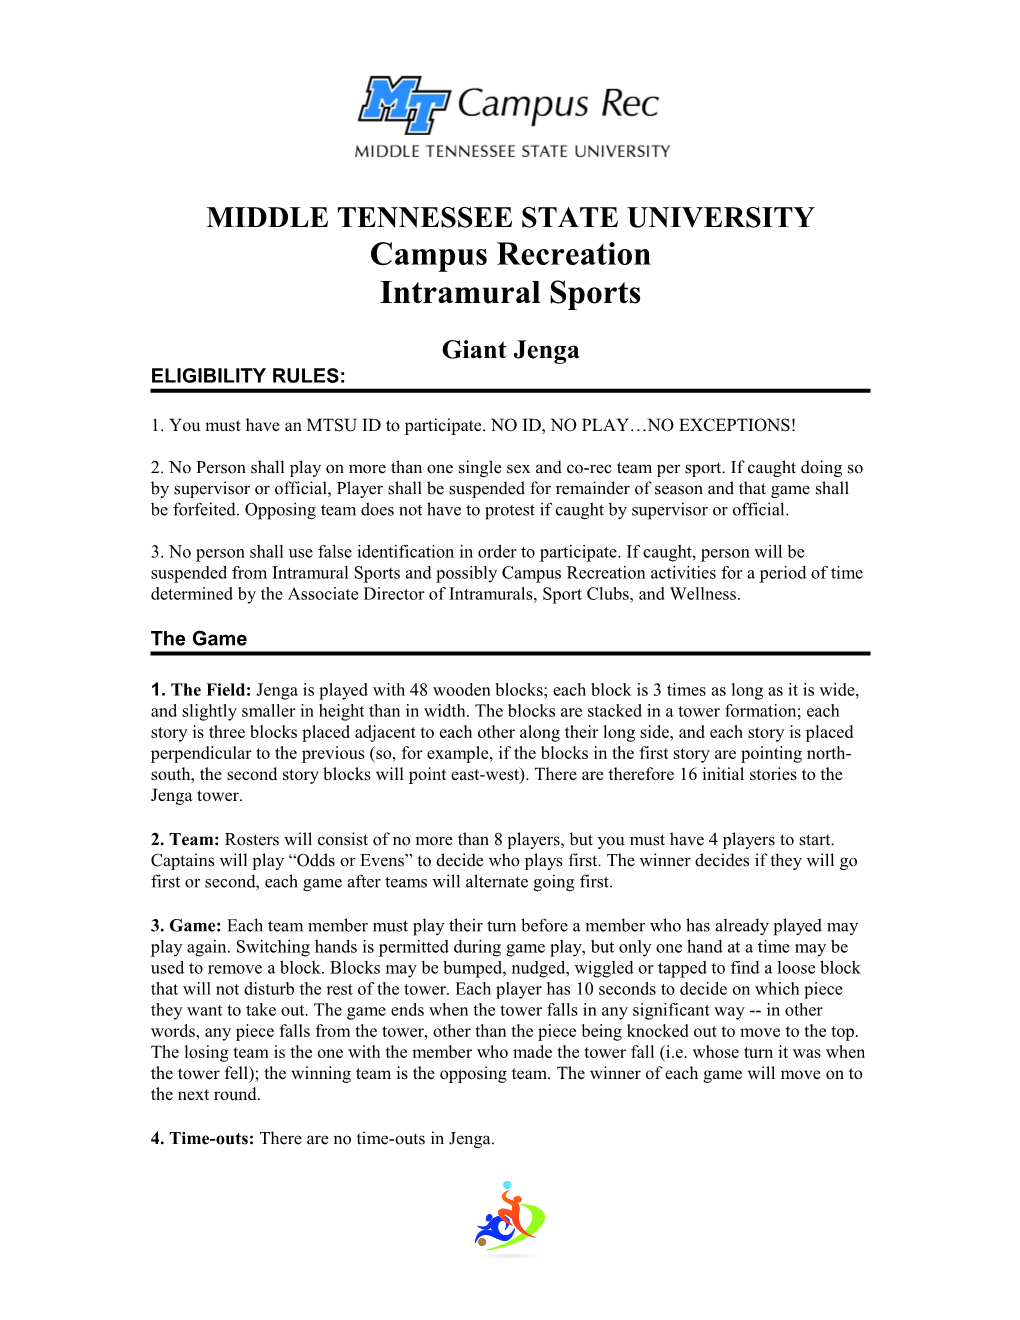 Middle Tennessee State University s1